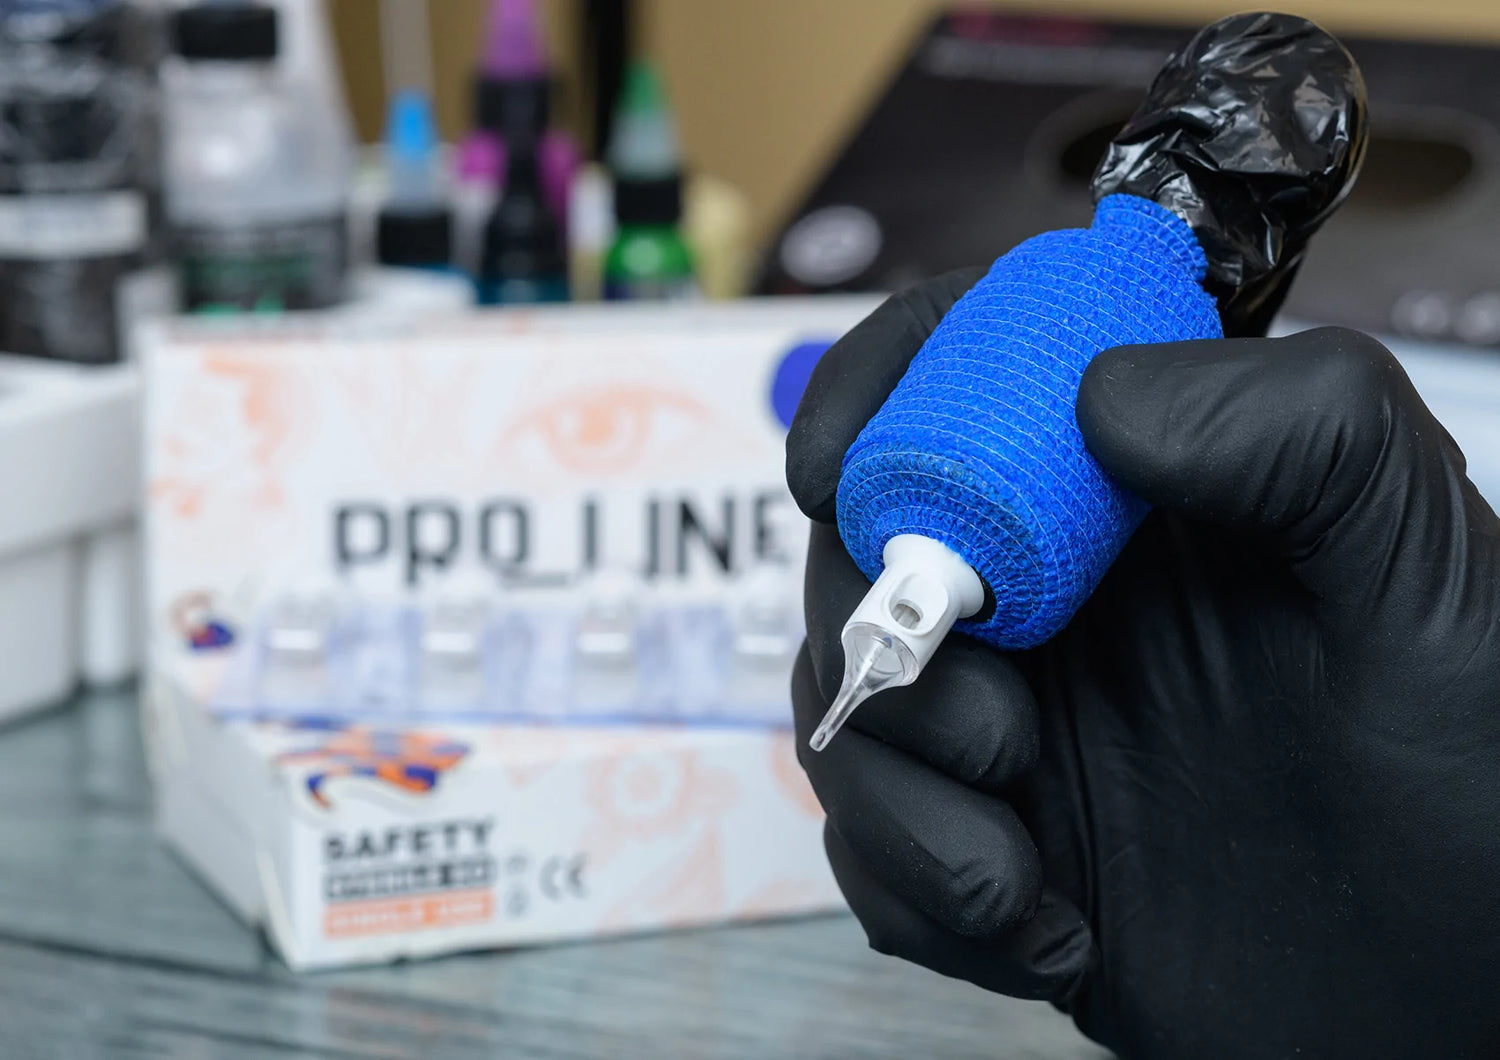 Close-up view of a Pro-Line Premium Cartridges cartridge, held by a hand wearing black gloves. The cartridge is the focal point of the image, displaying intricate details and branding. In the background, multiple Pro-Line Premium Cartridges boxes are stacked, adding context to the product's availability.